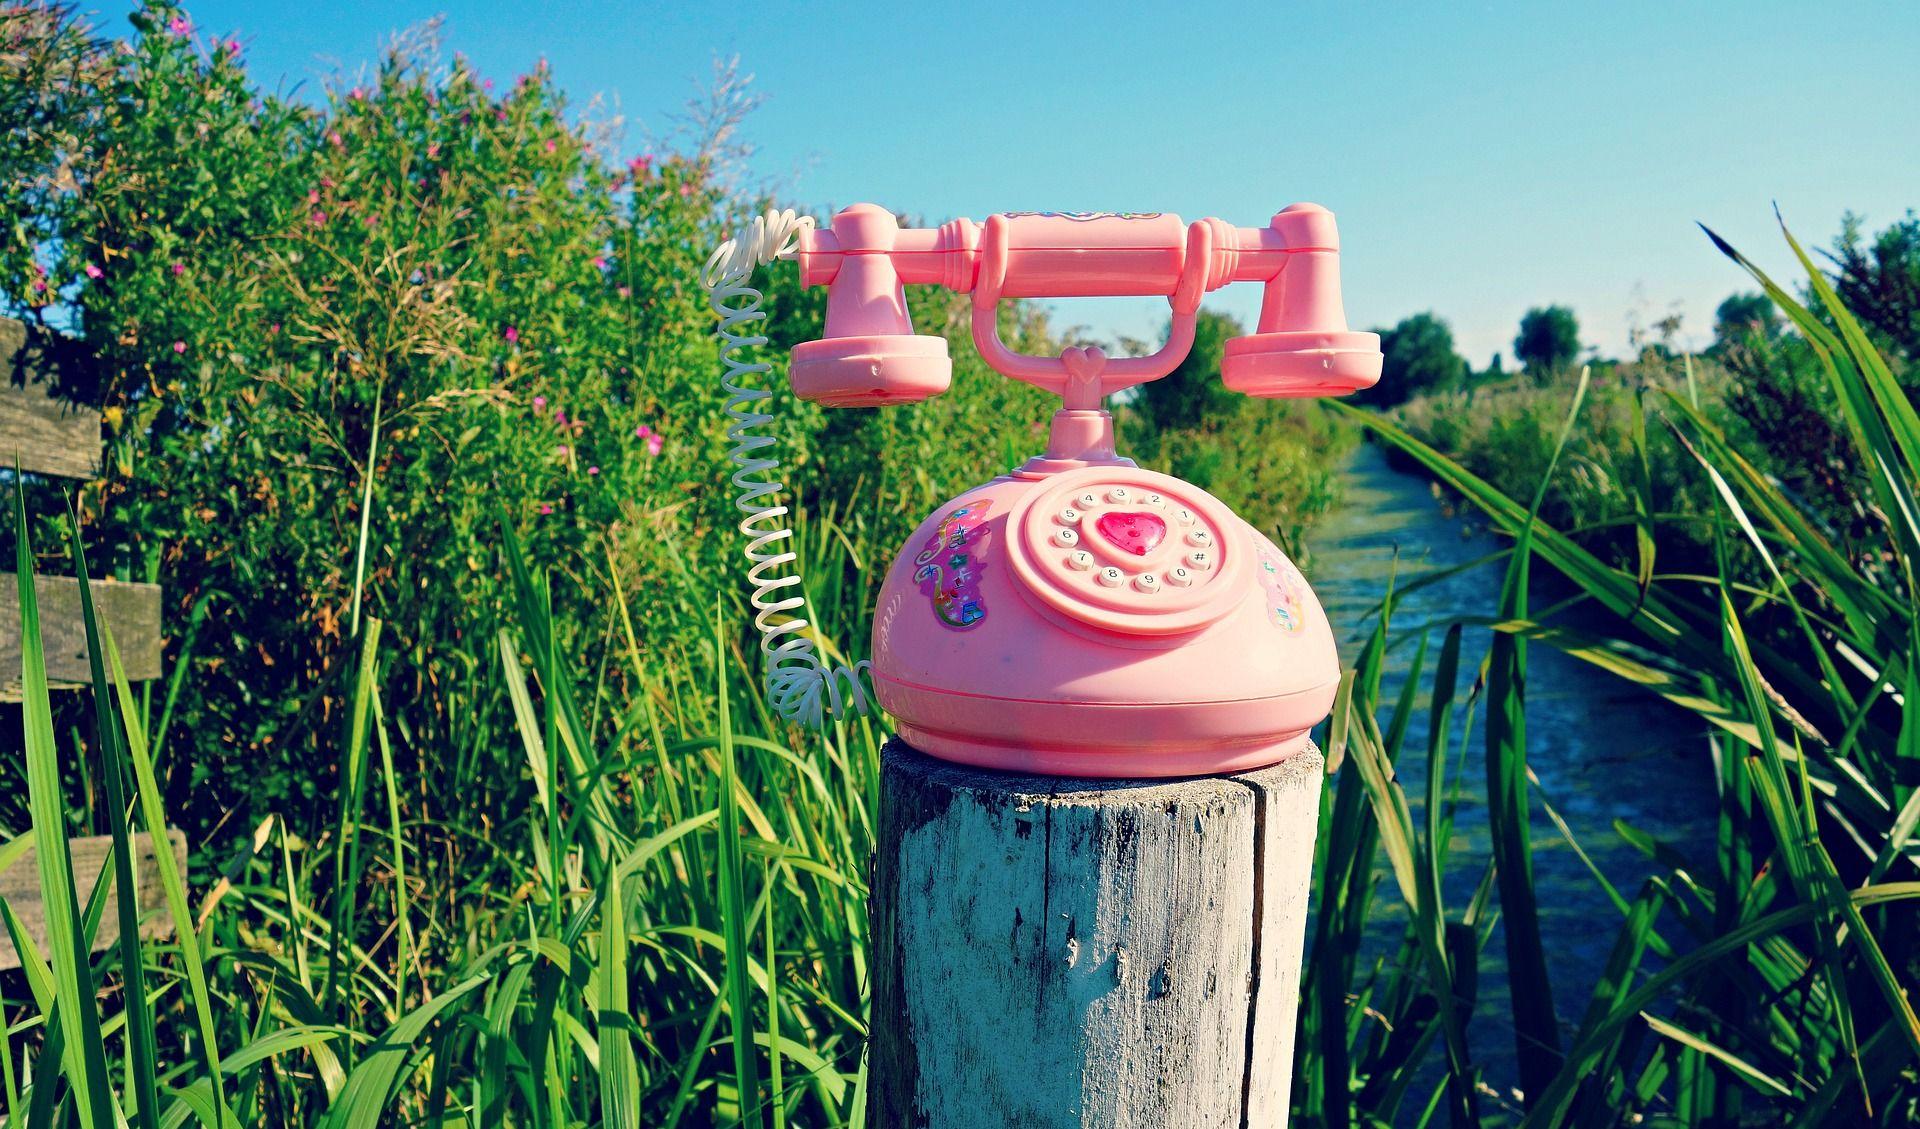 A pink phone on a wooden stake close. In the background there ist water and plants and a blue sky.